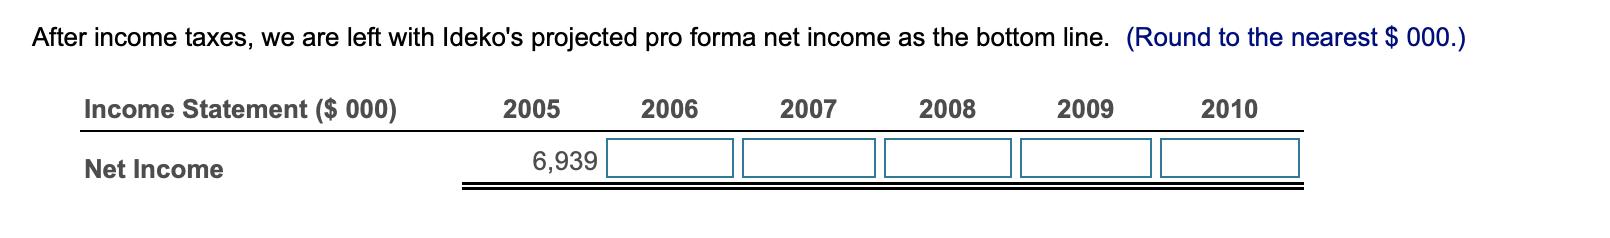 After income taxes, we are left with Ideko's projected pro forma net income as the bottom line. (Round to the